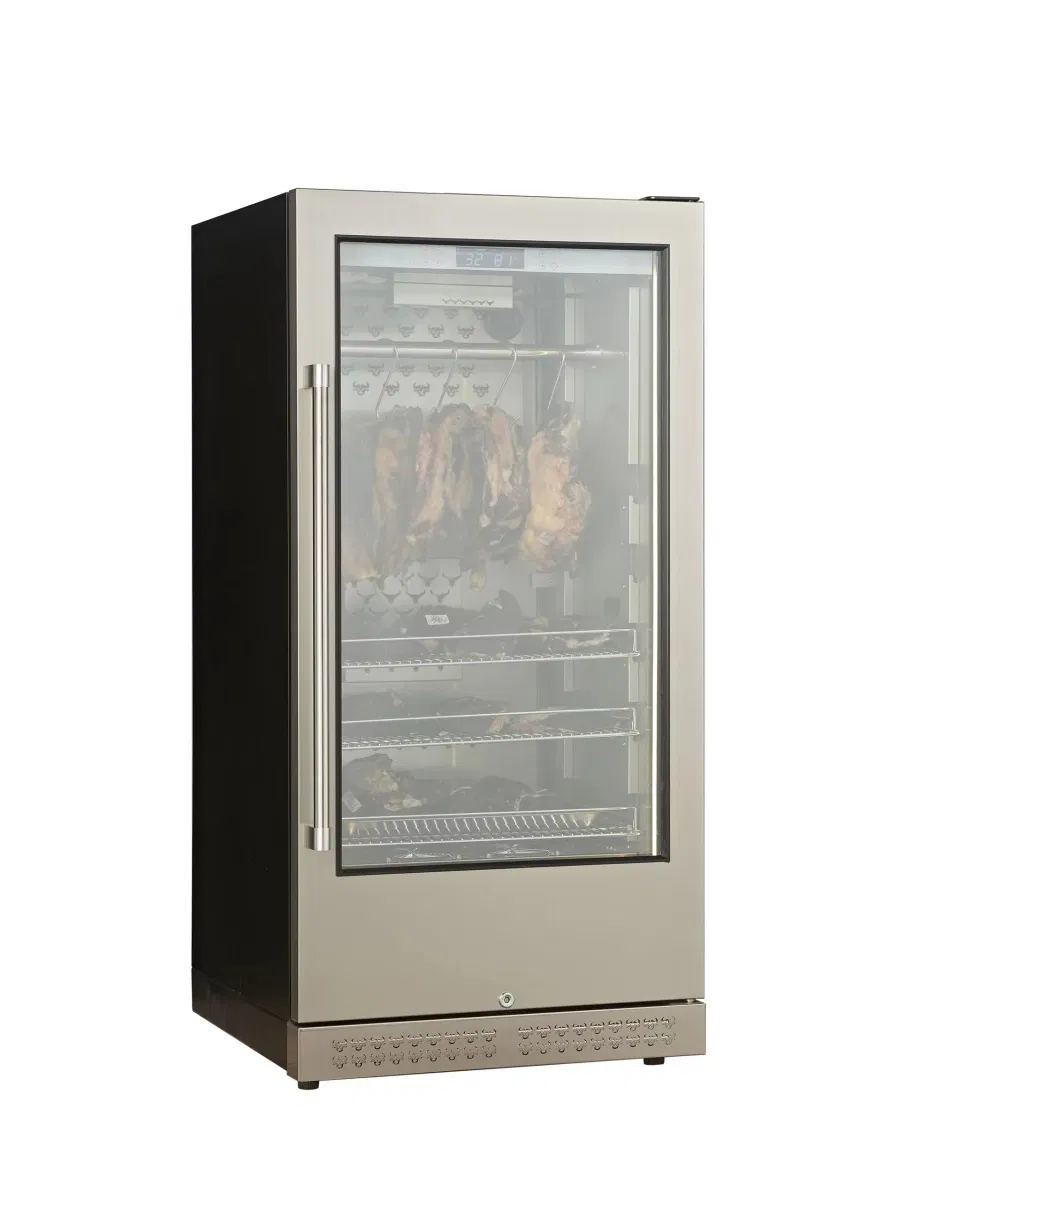 Hotsale Wholesale Commercial Dry Aging Hanging Meat Aging Refrigerator for Meat Aging Refrigerator